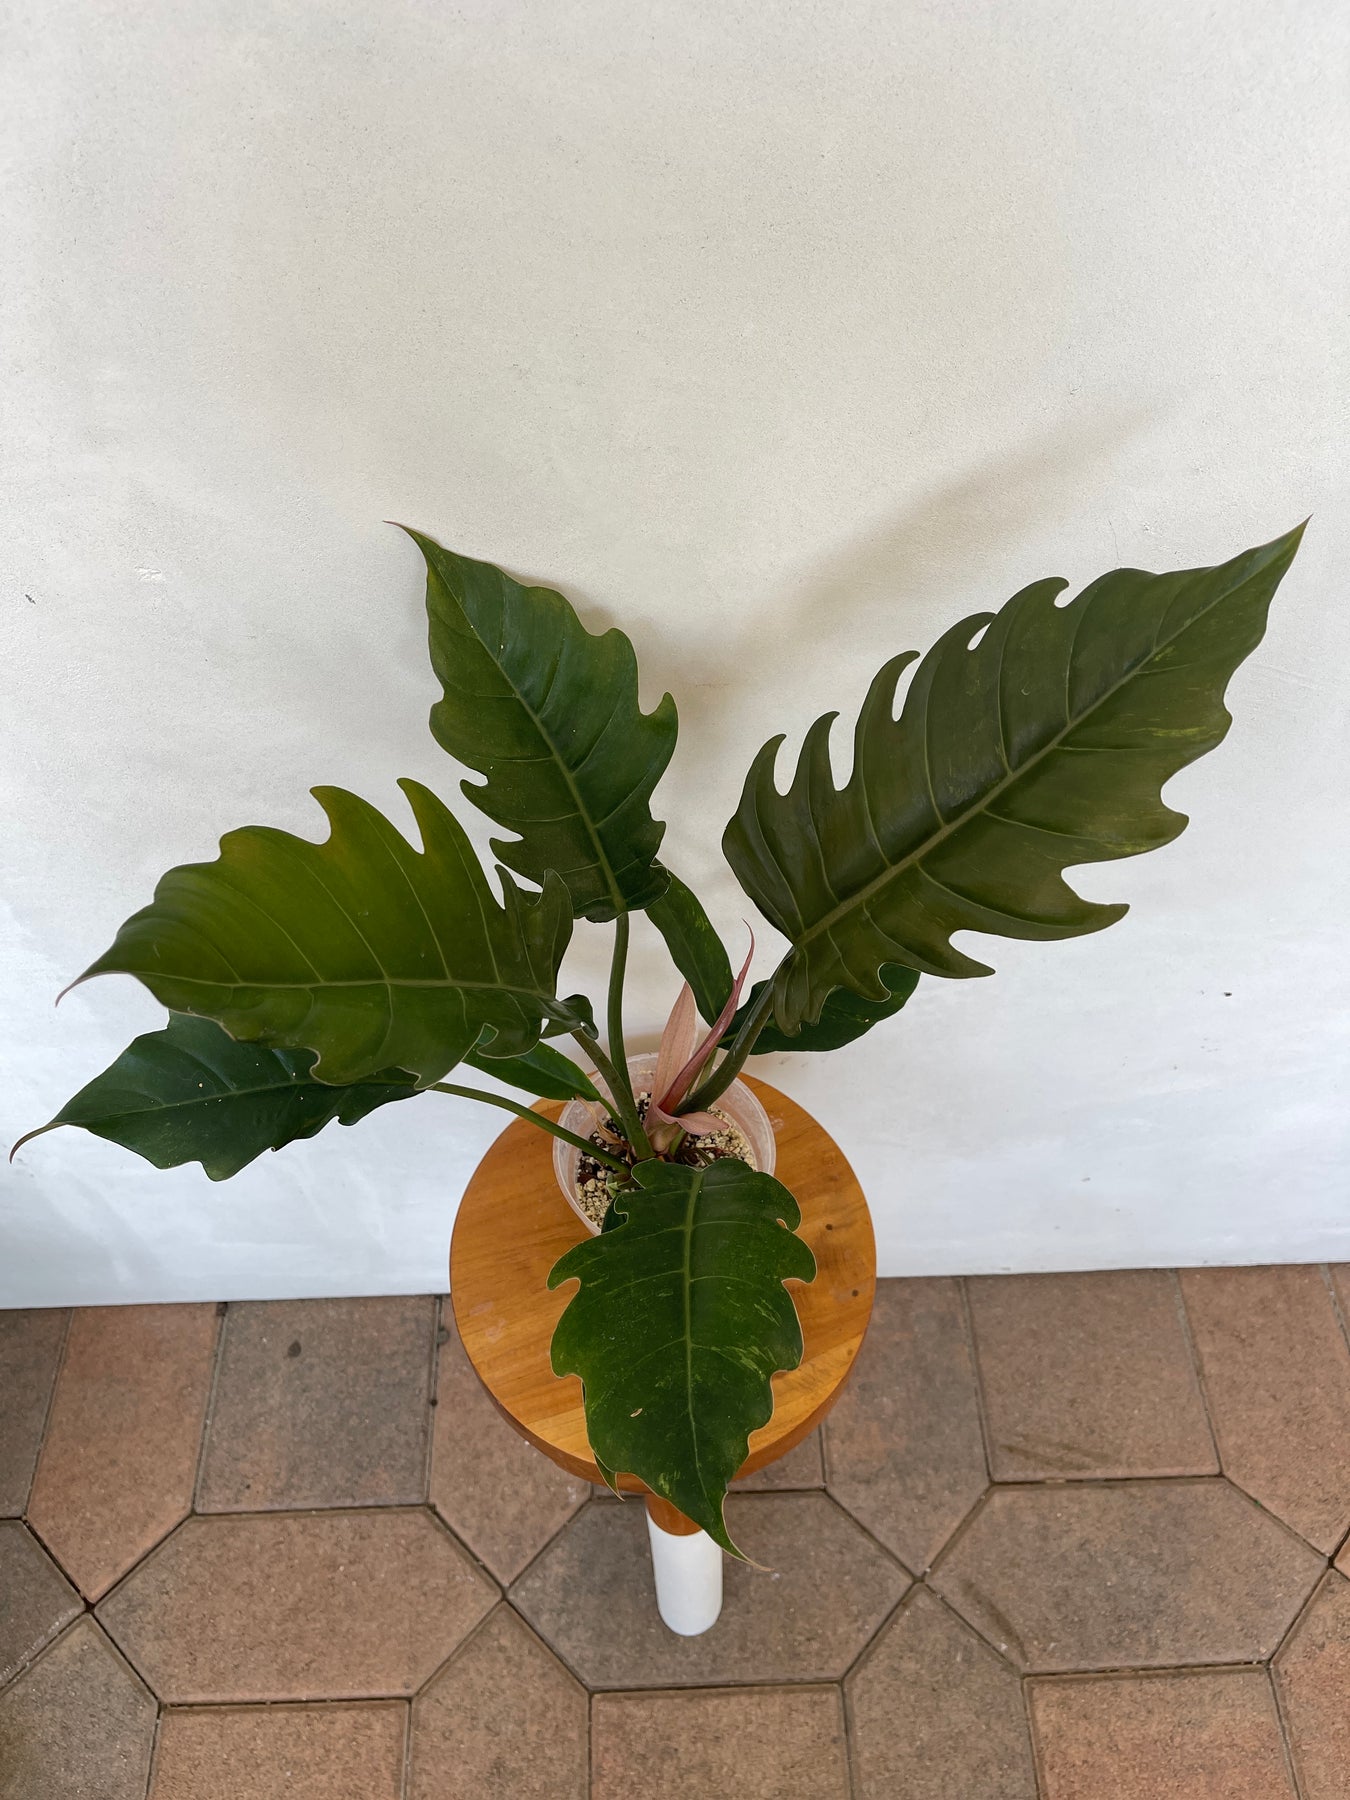 Philodendron Pluto Tropical Houseplant For Sale Near Me - Plant Vault - San Diego California